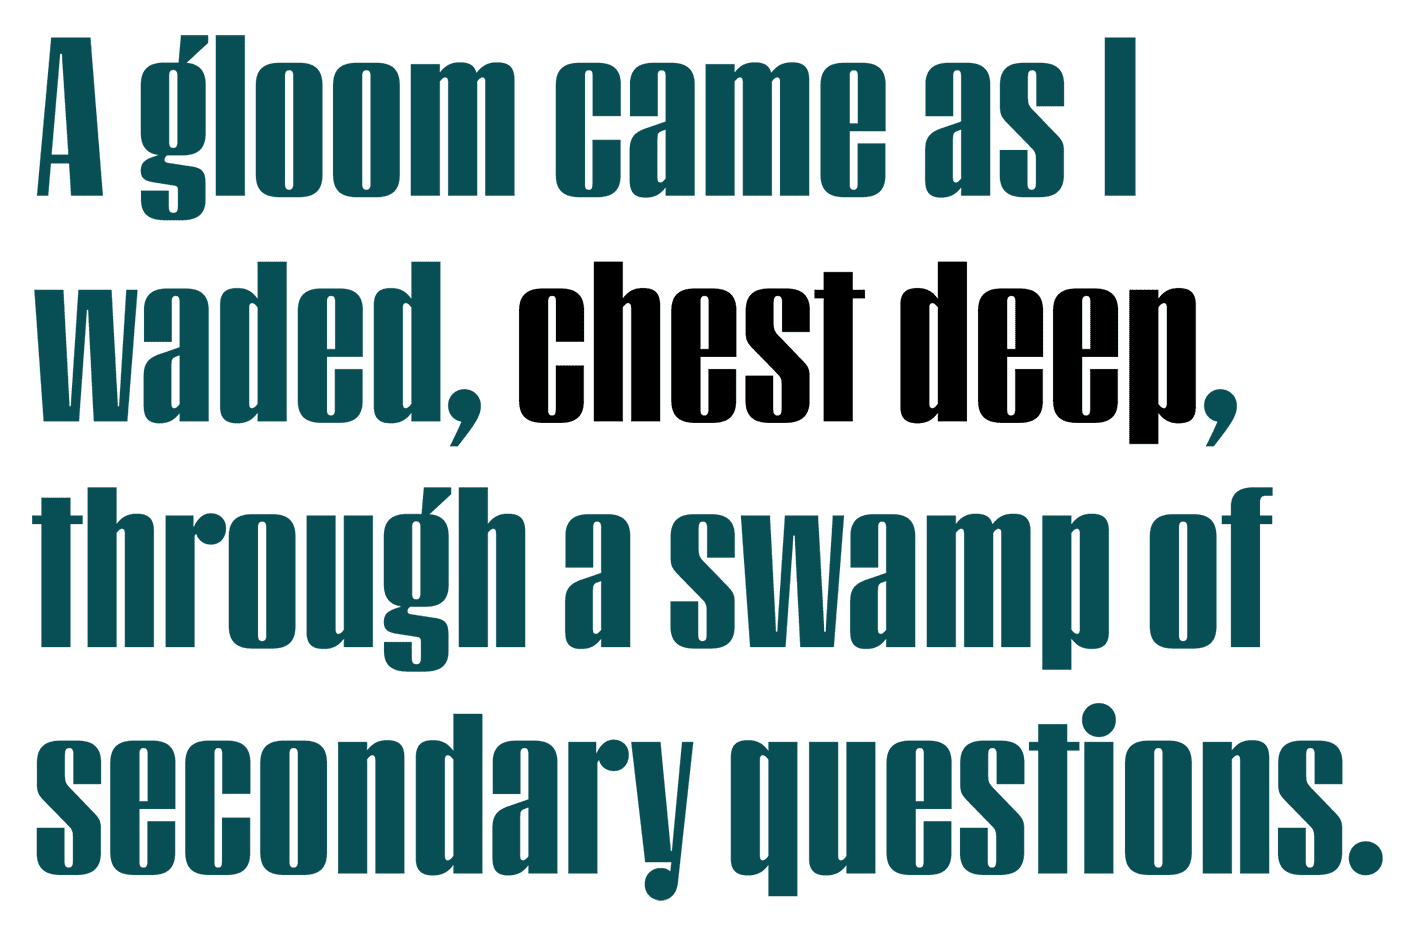 Quote that reads, "A gloom came as I waded, chest deep, through a swamp of secondary questions."